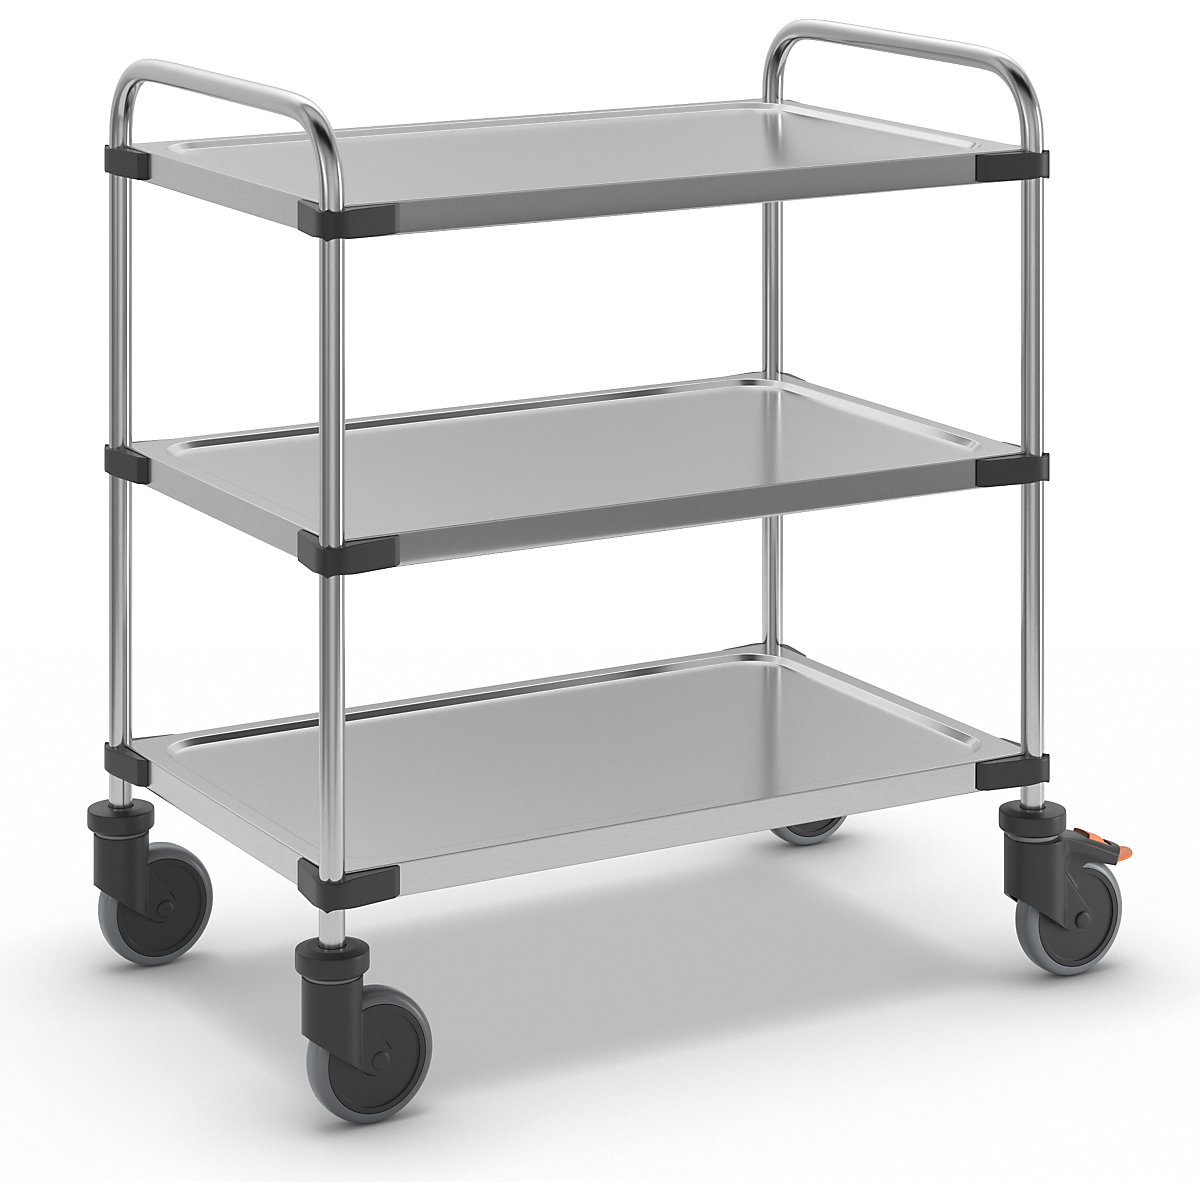 Stainless steel table trolley, with 3 shelves, LxWxH 870 x 570 x 950 mm, assembled-2